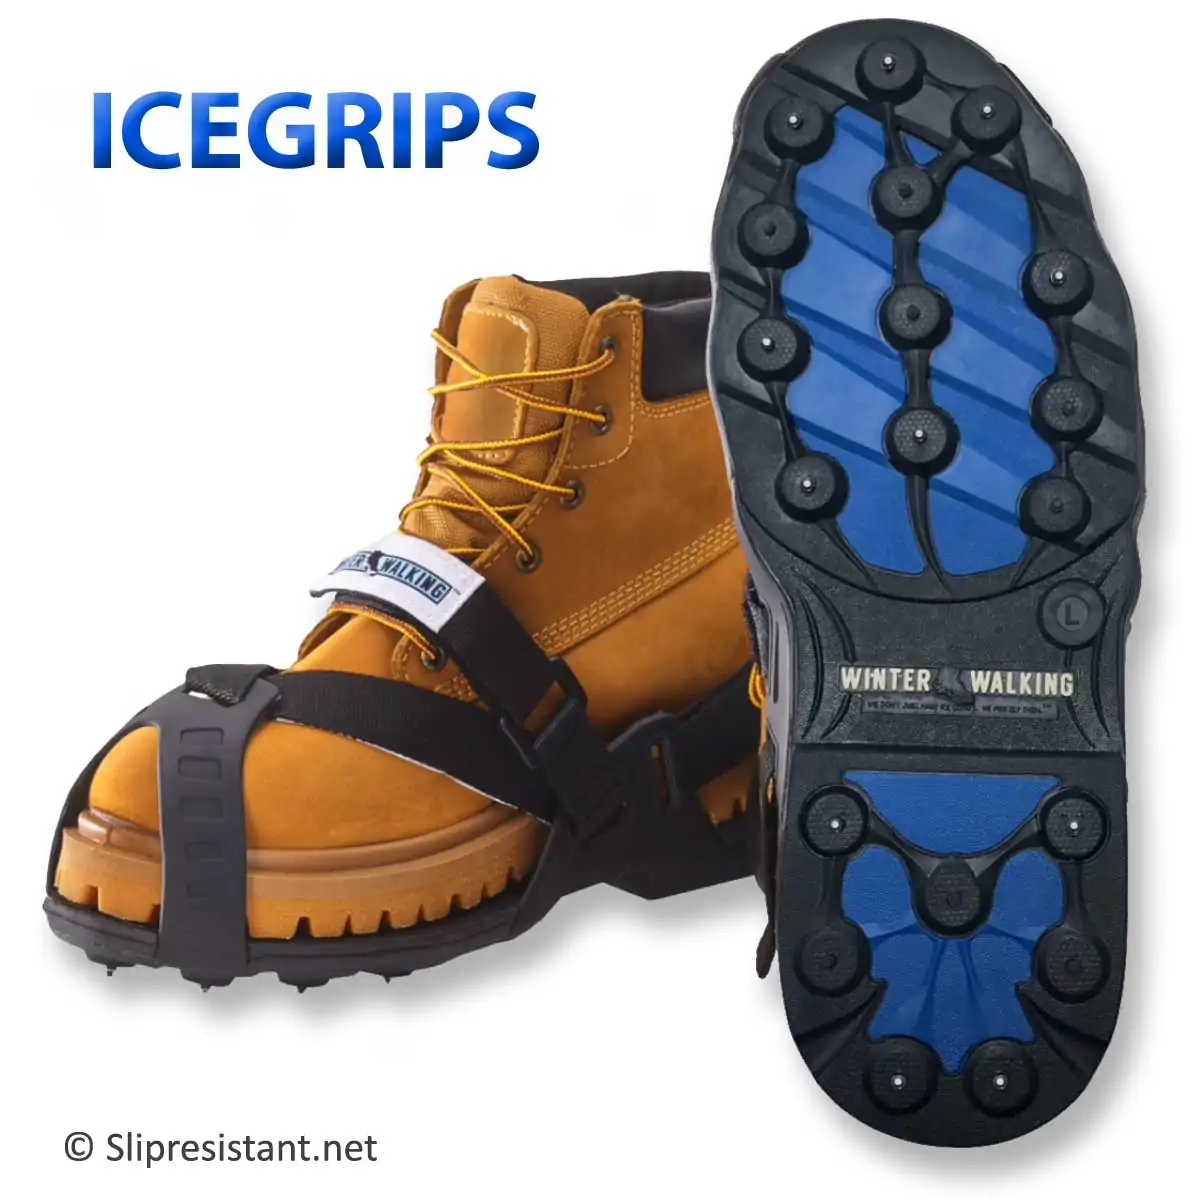 Winter Walking Spare Spike Ice Cleats Size Medium 6yvd5 for sale online 